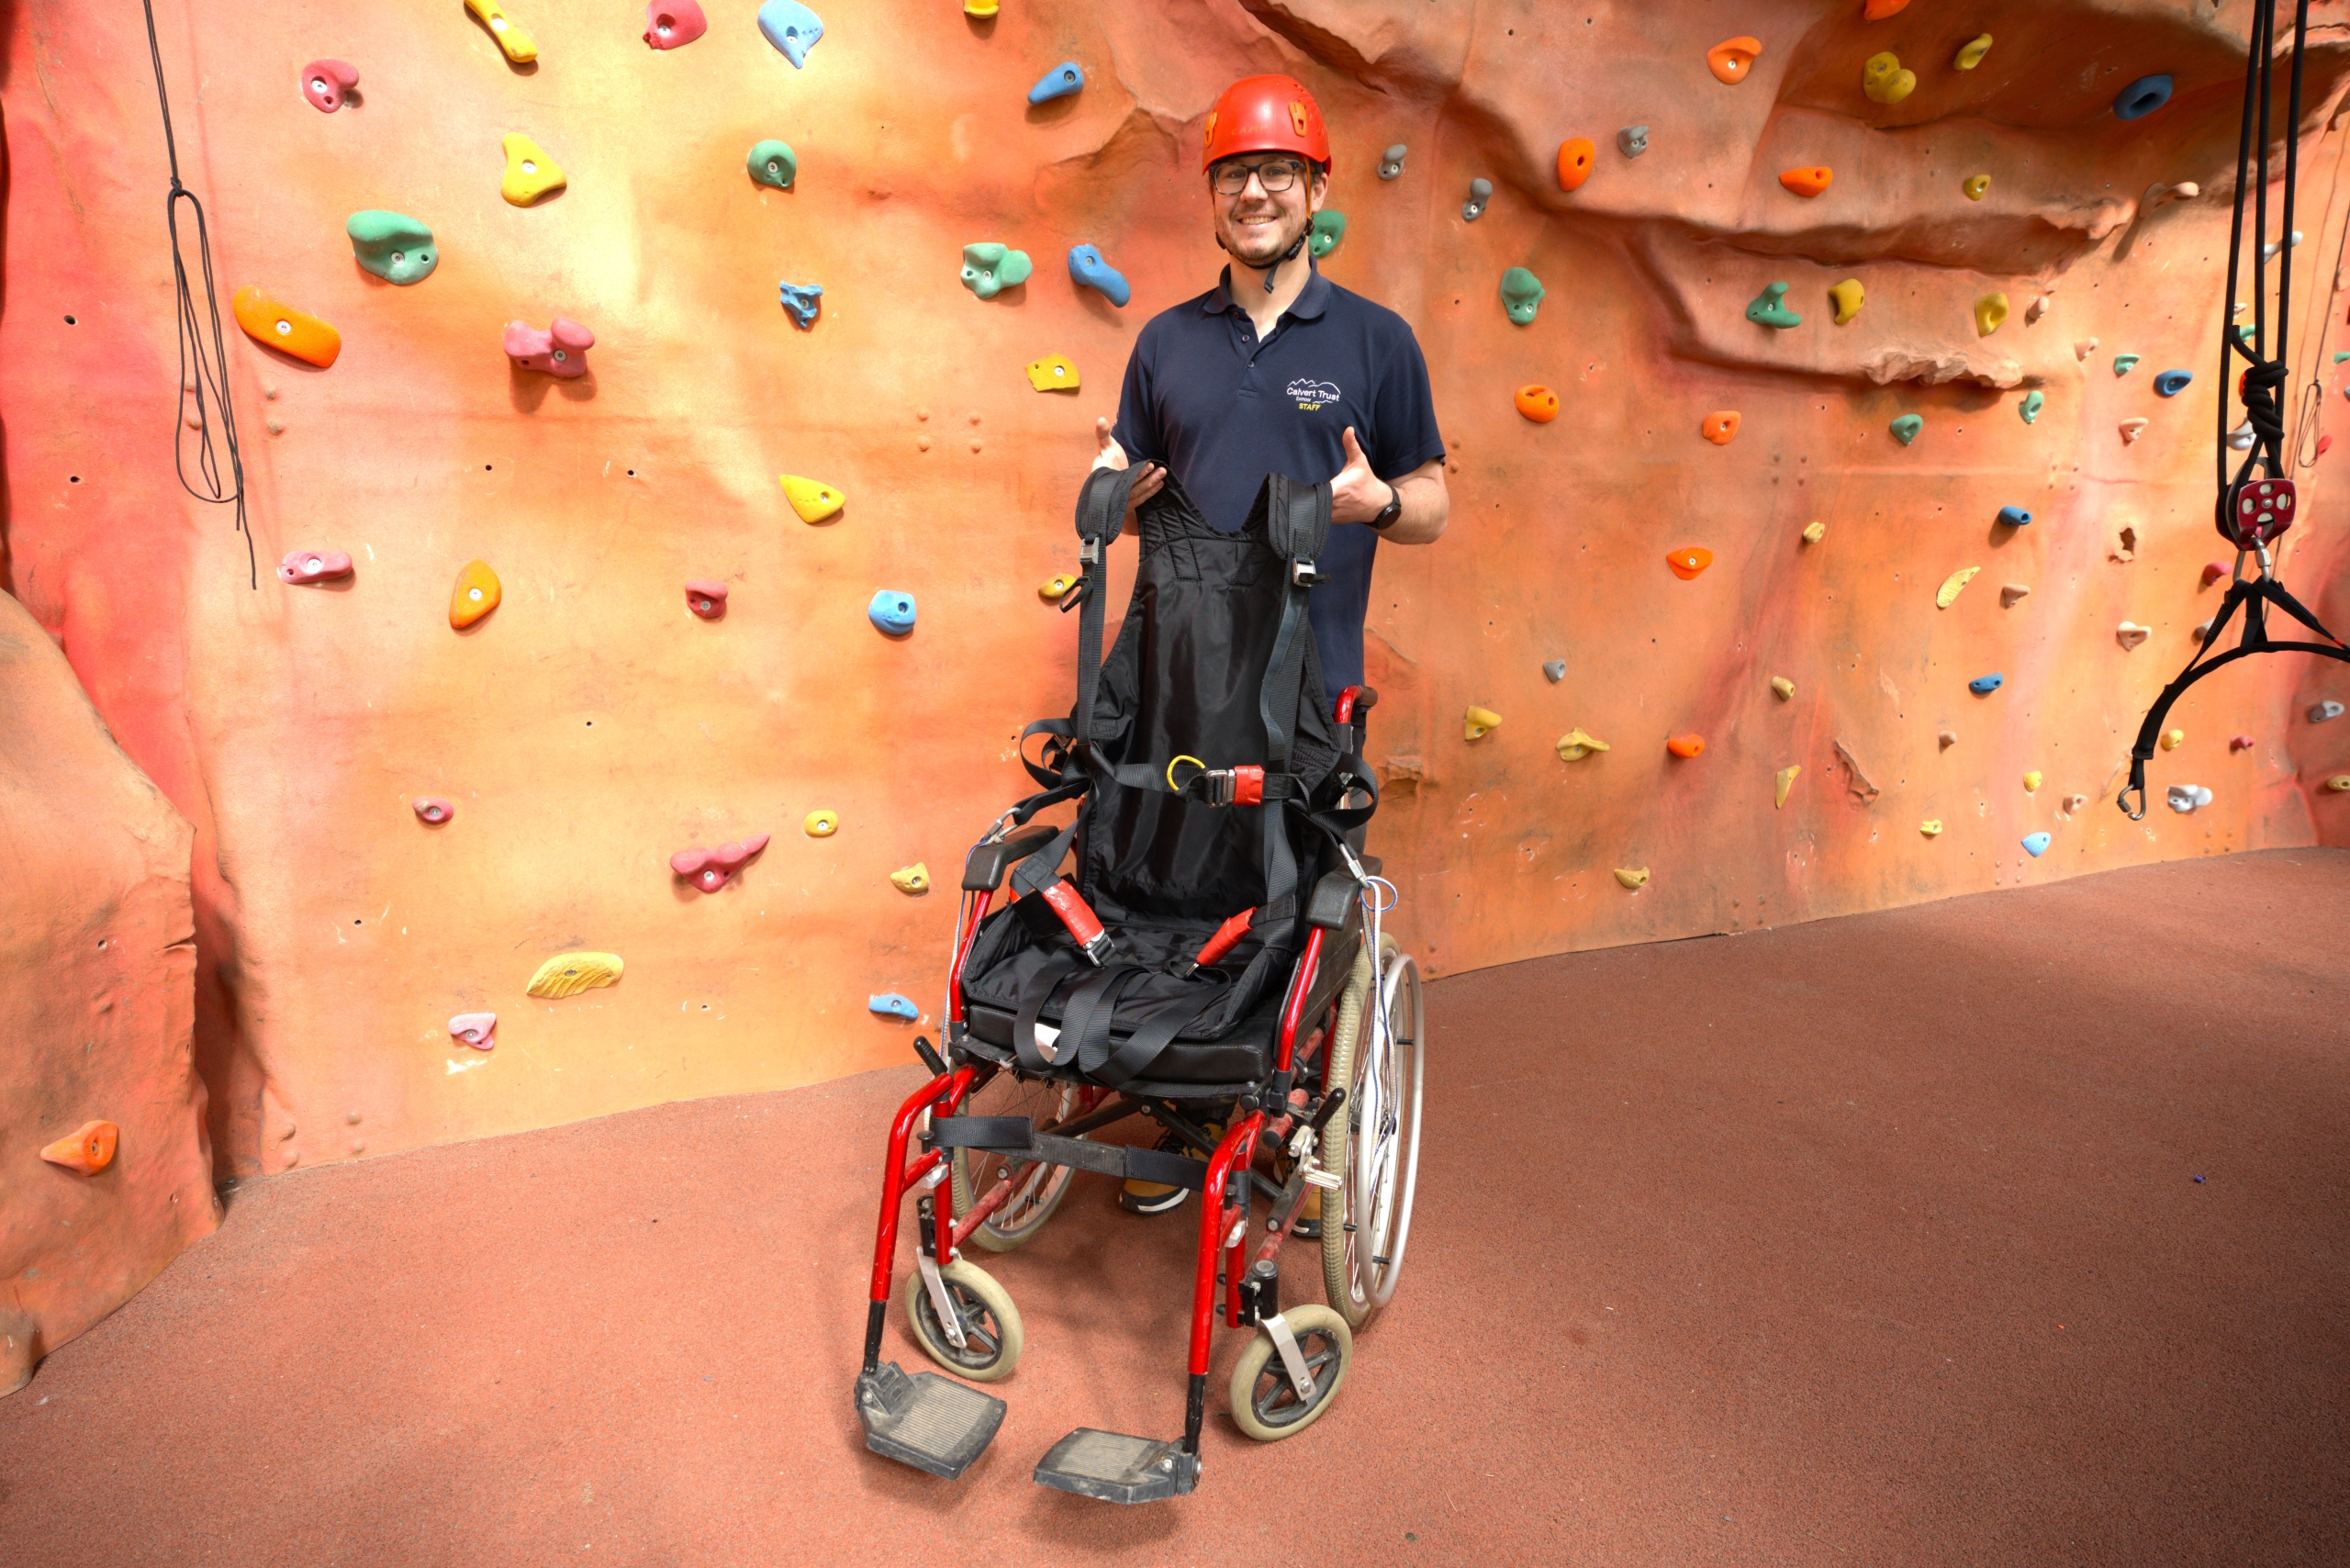 A member of Calvert Exmoor staff smiles at the camera holding up a harness, which can be used for accessible climbing and abseiling, within a red wheelchair in front of the indoor climbing wall.